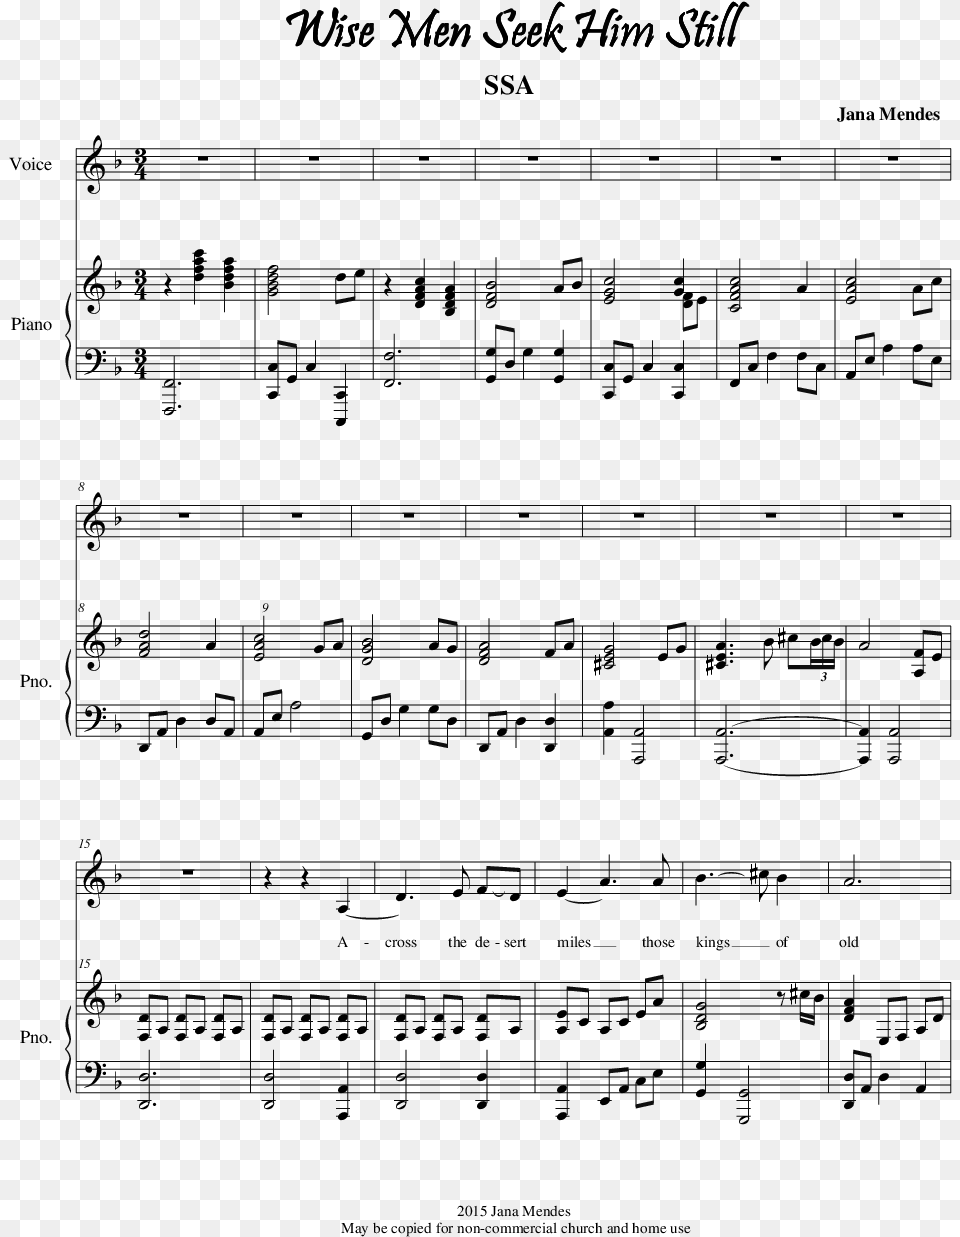 Sheet Music Picture Just Another Day Piano Sheet Music Free Transparent Png